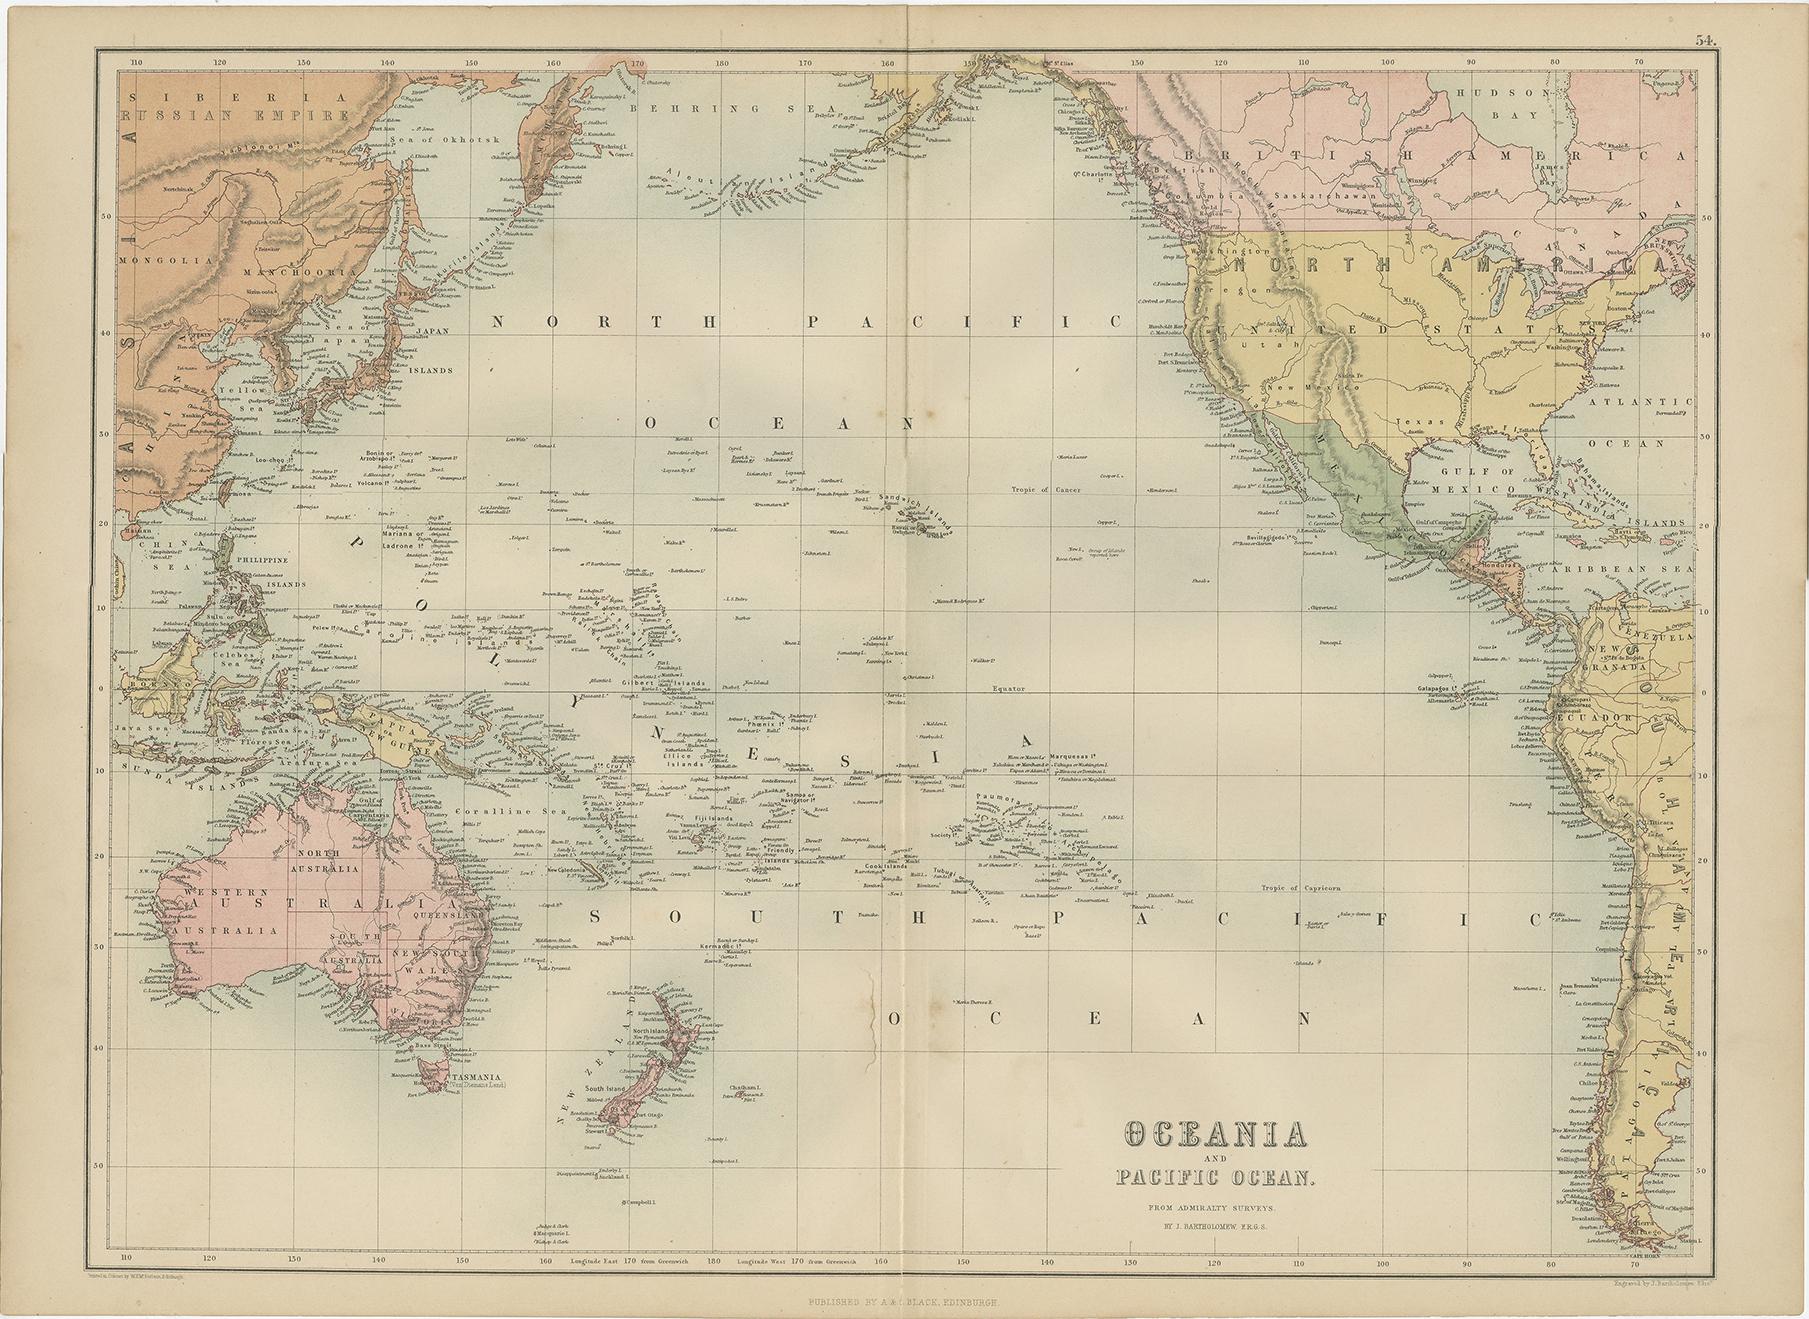 Paper Antique Map of Oceania and the Pacific Ocean by A & C. Black, 1870